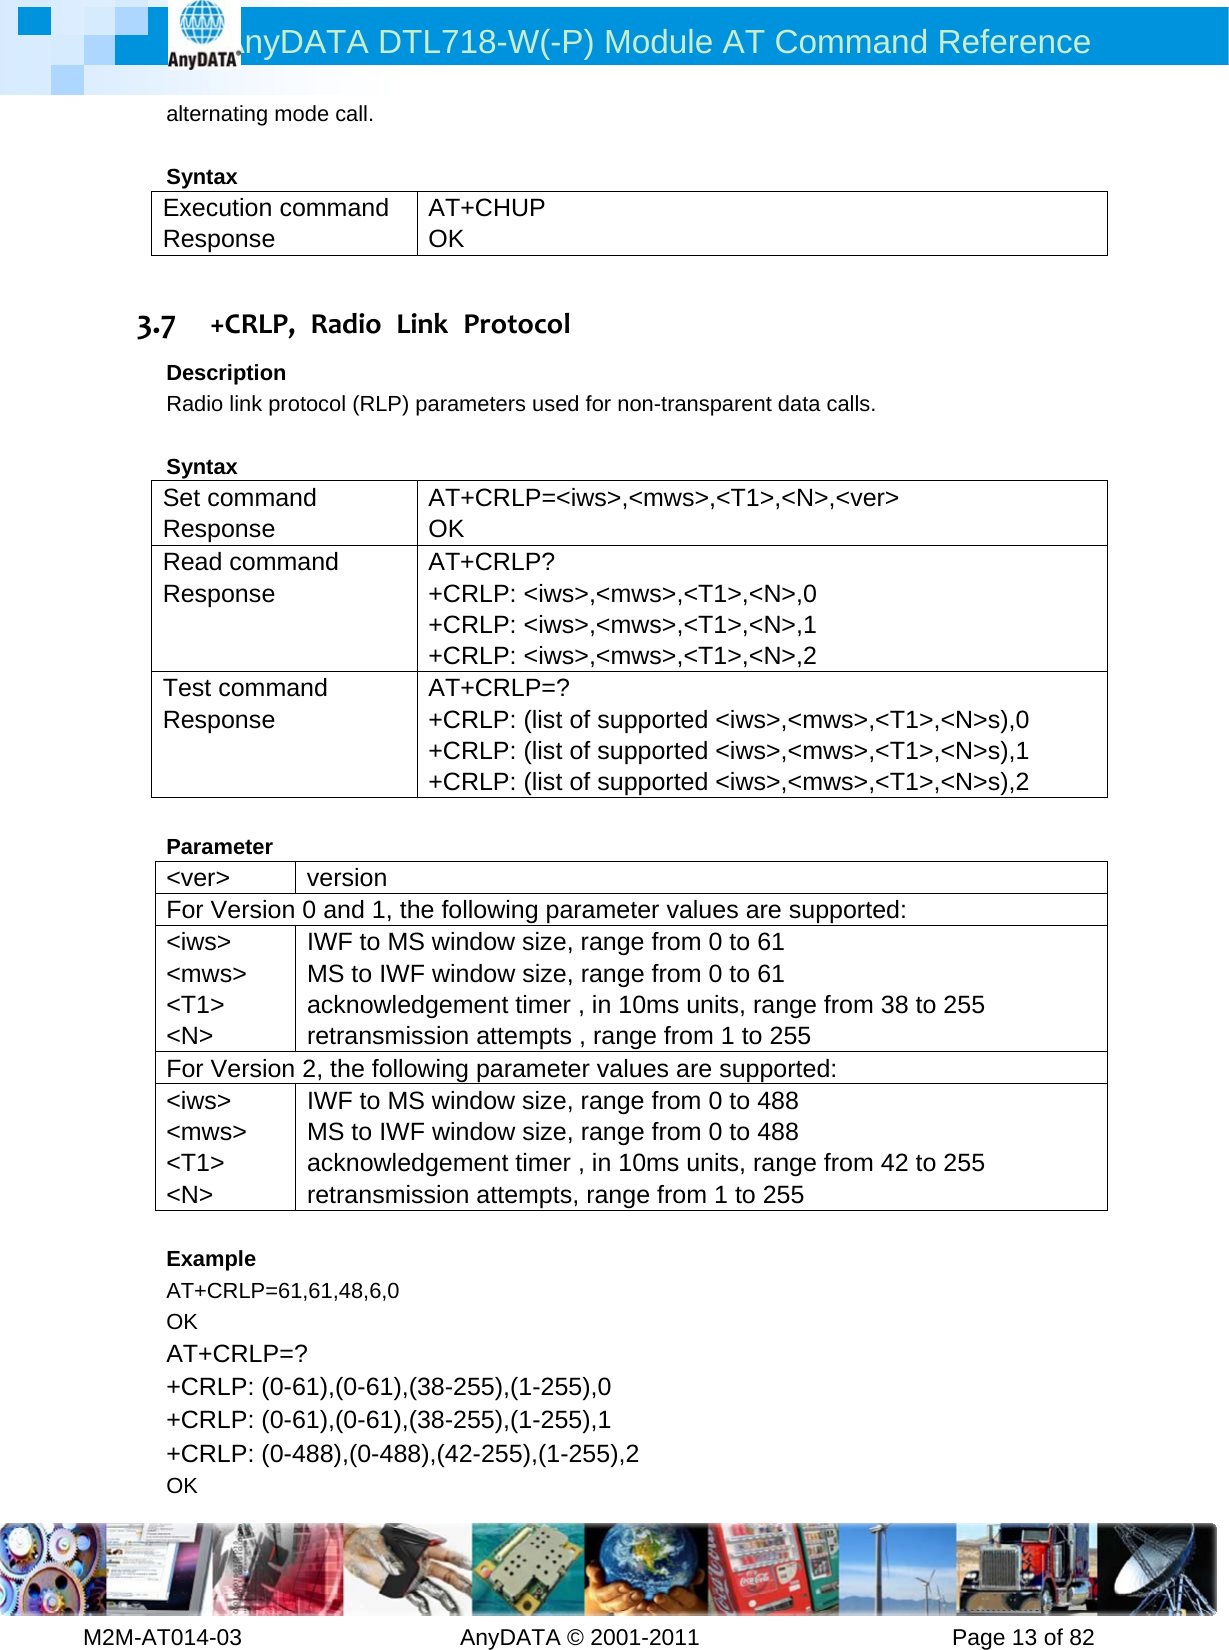 AnyDATA DTL718-W(-P) Module AT Command Reference         M2M-AT014-03                   AnyDATA © 2001-2011                      Page 13 of 82 alternating mode call.  Syntax Execution command Response AT+CHUP OK  3.7 +CRLP,RadioLinkProtocolDescription Radio link protocol (RLP) parameters used for non-transparent data calls.  Syntax Set command Response AT+CRLP=&lt;iws&gt;,&lt;mws&gt;,&lt;T1&gt;,&lt;N&gt;,&lt;ver&gt; OK Read command Response AT+CRLP? +CRLP: &lt;iws&gt;,&lt;mws&gt;,&lt;T1&gt;,&lt;N&gt;,0 +CRLP: &lt;iws&gt;,&lt;mws&gt;,&lt;T1&gt;,&lt;N&gt;,1 +CRLP: &lt;iws&gt;,&lt;mws&gt;,&lt;T1&gt;,&lt;N&gt;,2 Test command Response AT+CRLP=? +CRLP: (list of supported &lt;iws&gt;,&lt;mws&gt;,&lt;T1&gt;,&lt;N&gt;s),0 +CRLP: (list of supported &lt;iws&gt;,&lt;mws&gt;,&lt;T1&gt;,&lt;N&gt;s),1 +CRLP: (list of supported &lt;iws&gt;,&lt;mws&gt;,&lt;T1&gt;,&lt;N&gt;s),2  Parameter &lt;ver&gt; version For Version 0 and 1, the following parameter values are supported:   &lt;iws&gt; &lt;mws&gt; &lt;T1&gt; &lt;N&gt; IWF to MS window size, range from 0 to 61 MS to IWF window size, range from 0 to 61 acknowledgement timer , in 10ms units, range from 38 to 255 retransmission attempts , range from 1 to 255 For Version 2, the following parameter values are supported: &lt;iws&gt; &lt;mws&gt; &lt;T1&gt; &lt;N&gt; IWF to MS window size, range from 0 to 488 MS to IWF window size, range from 0 to 488 acknowledgement timer , in 10ms units, range from 42 to 255 retransmission attempts, range from 1 to 255    Example AT+CRLP=61,61,48,6,0 OK AT+CRLP=? +CRLP: (0-61),(0-61),(38-255),(1-255),0 +CRLP: (0-61),(0-61),(38-255),(1-255),1 +CRLP: (0-488),(0-488),(42-255),(1-255),2 OK 